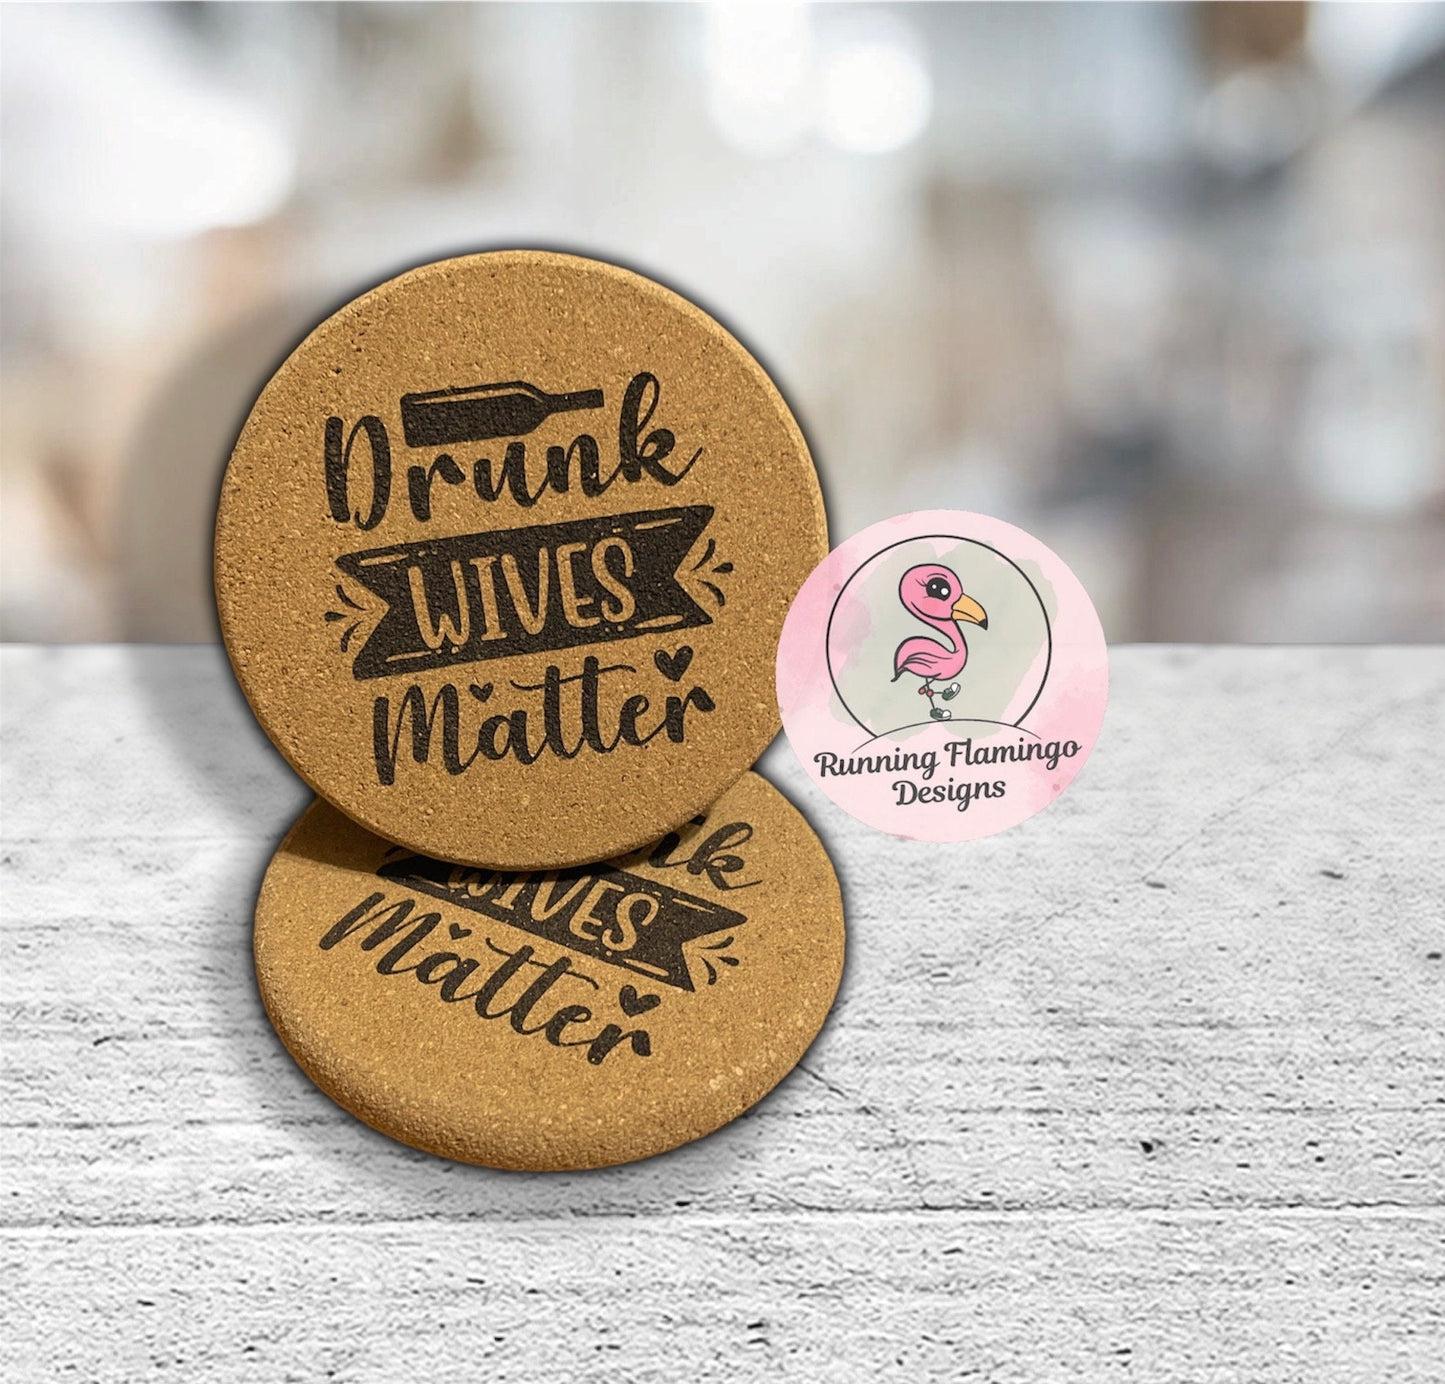 Engraved Coasters, cork coasters, gifts for couples, new home, home gift, drunk wives matter, funny decor, funny coasters, slate coasters